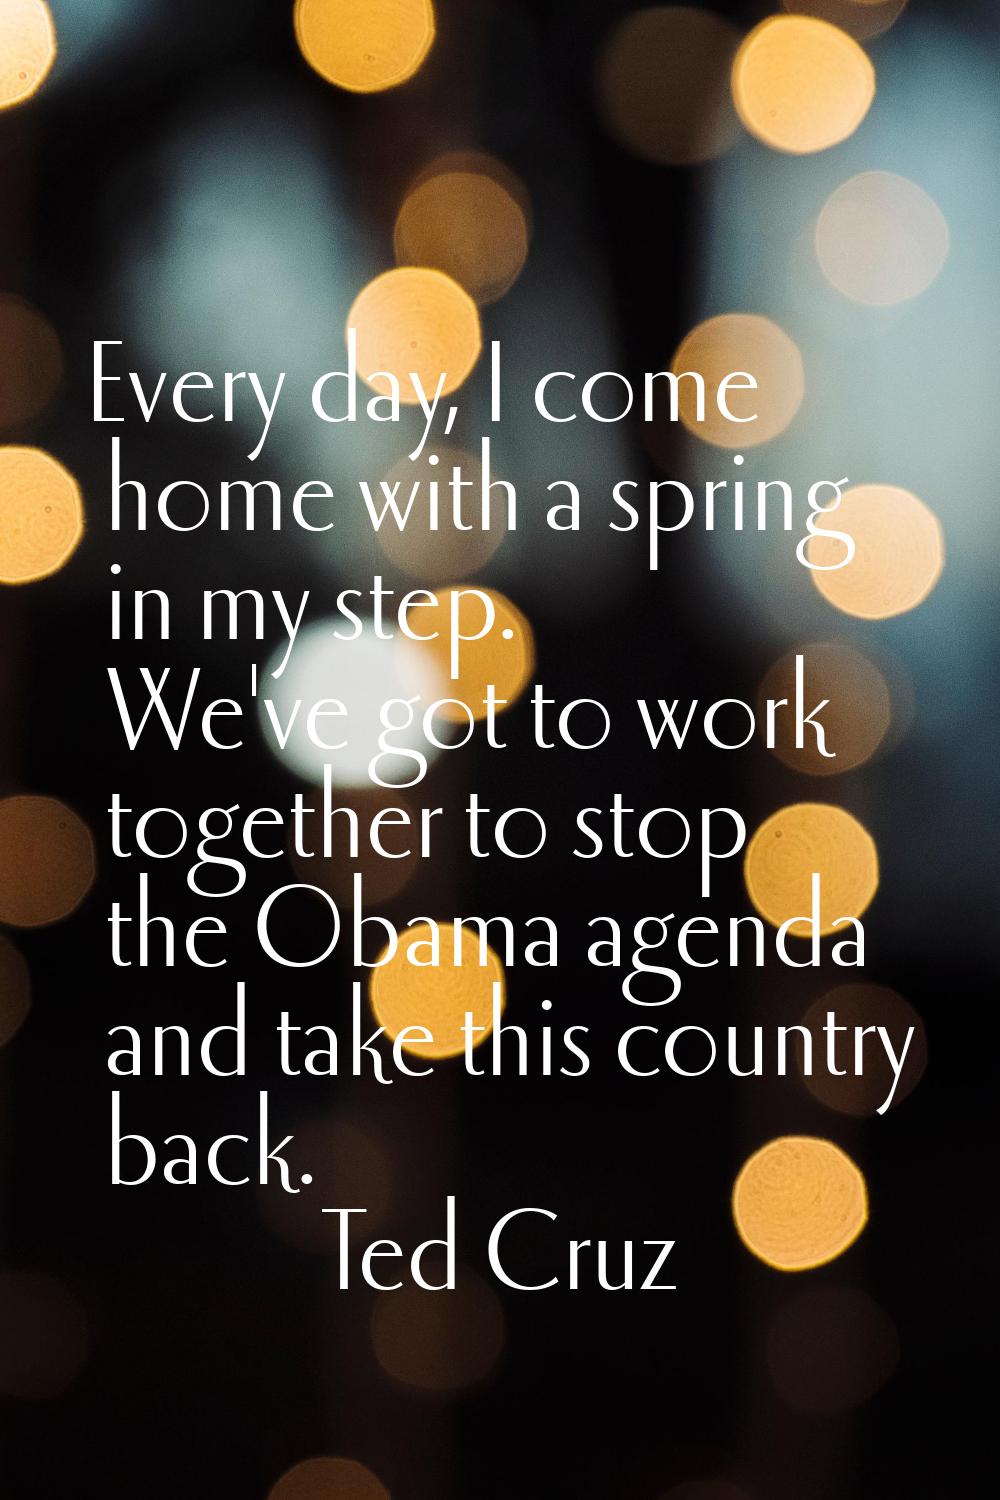 Every day, I come home with a spring in my step. We've got to work together to stop the Obama agend